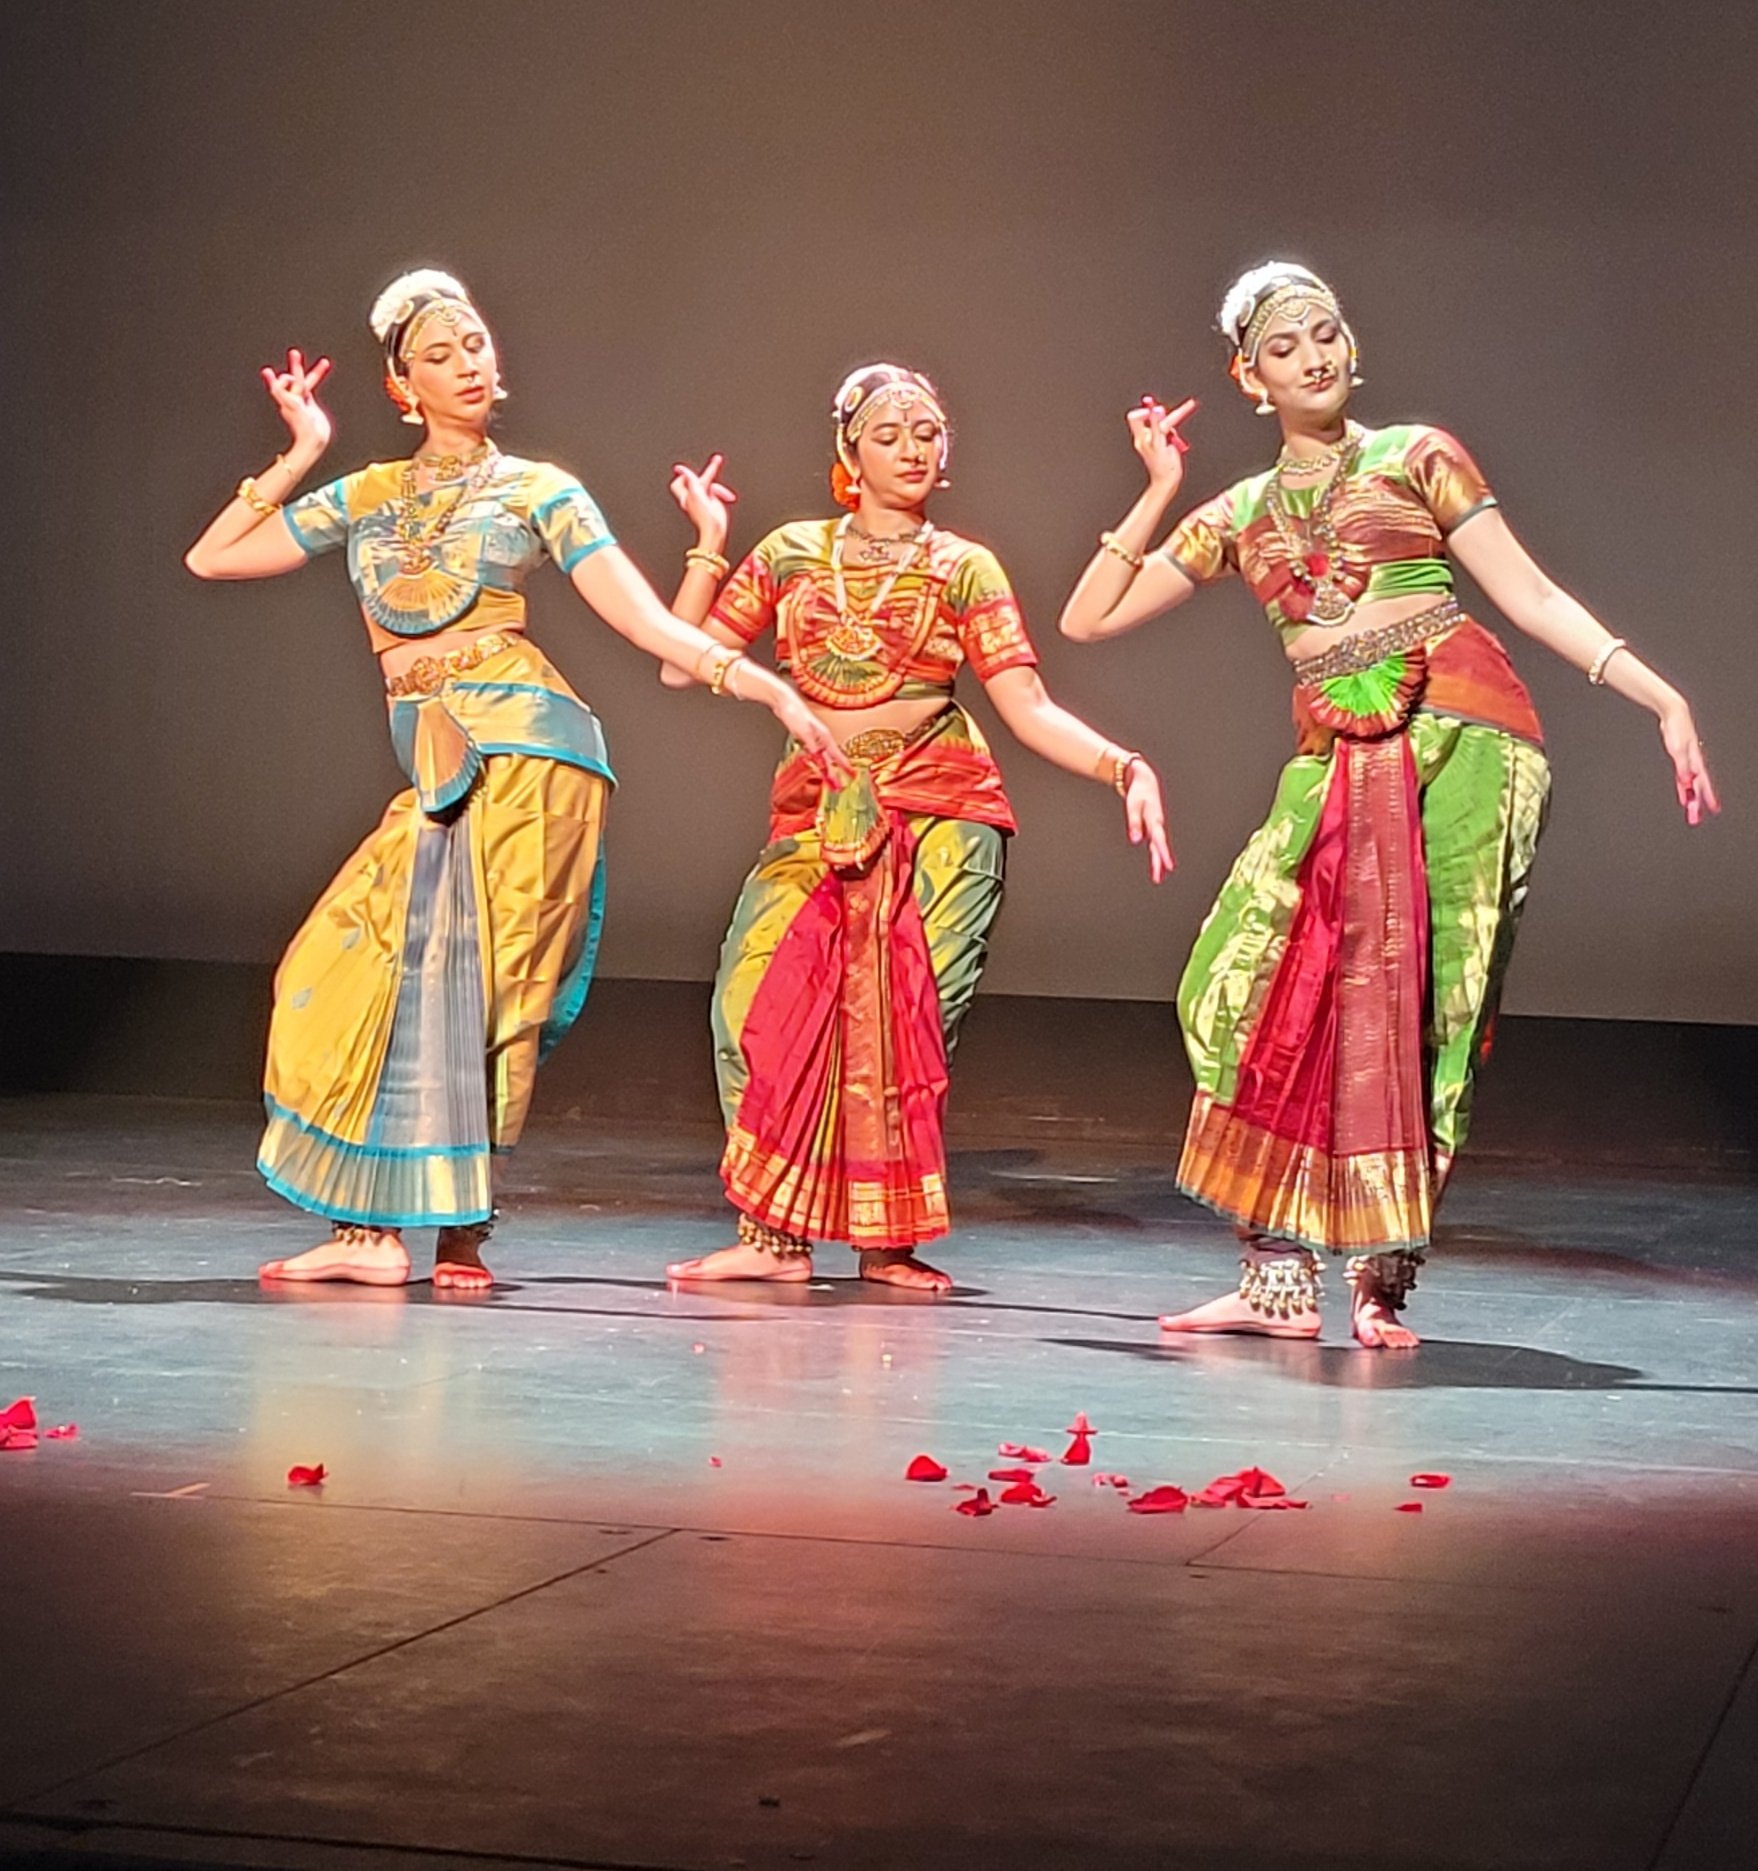 A dance performance on live music is like a cherry on the top! – THE DANCE  INDIA